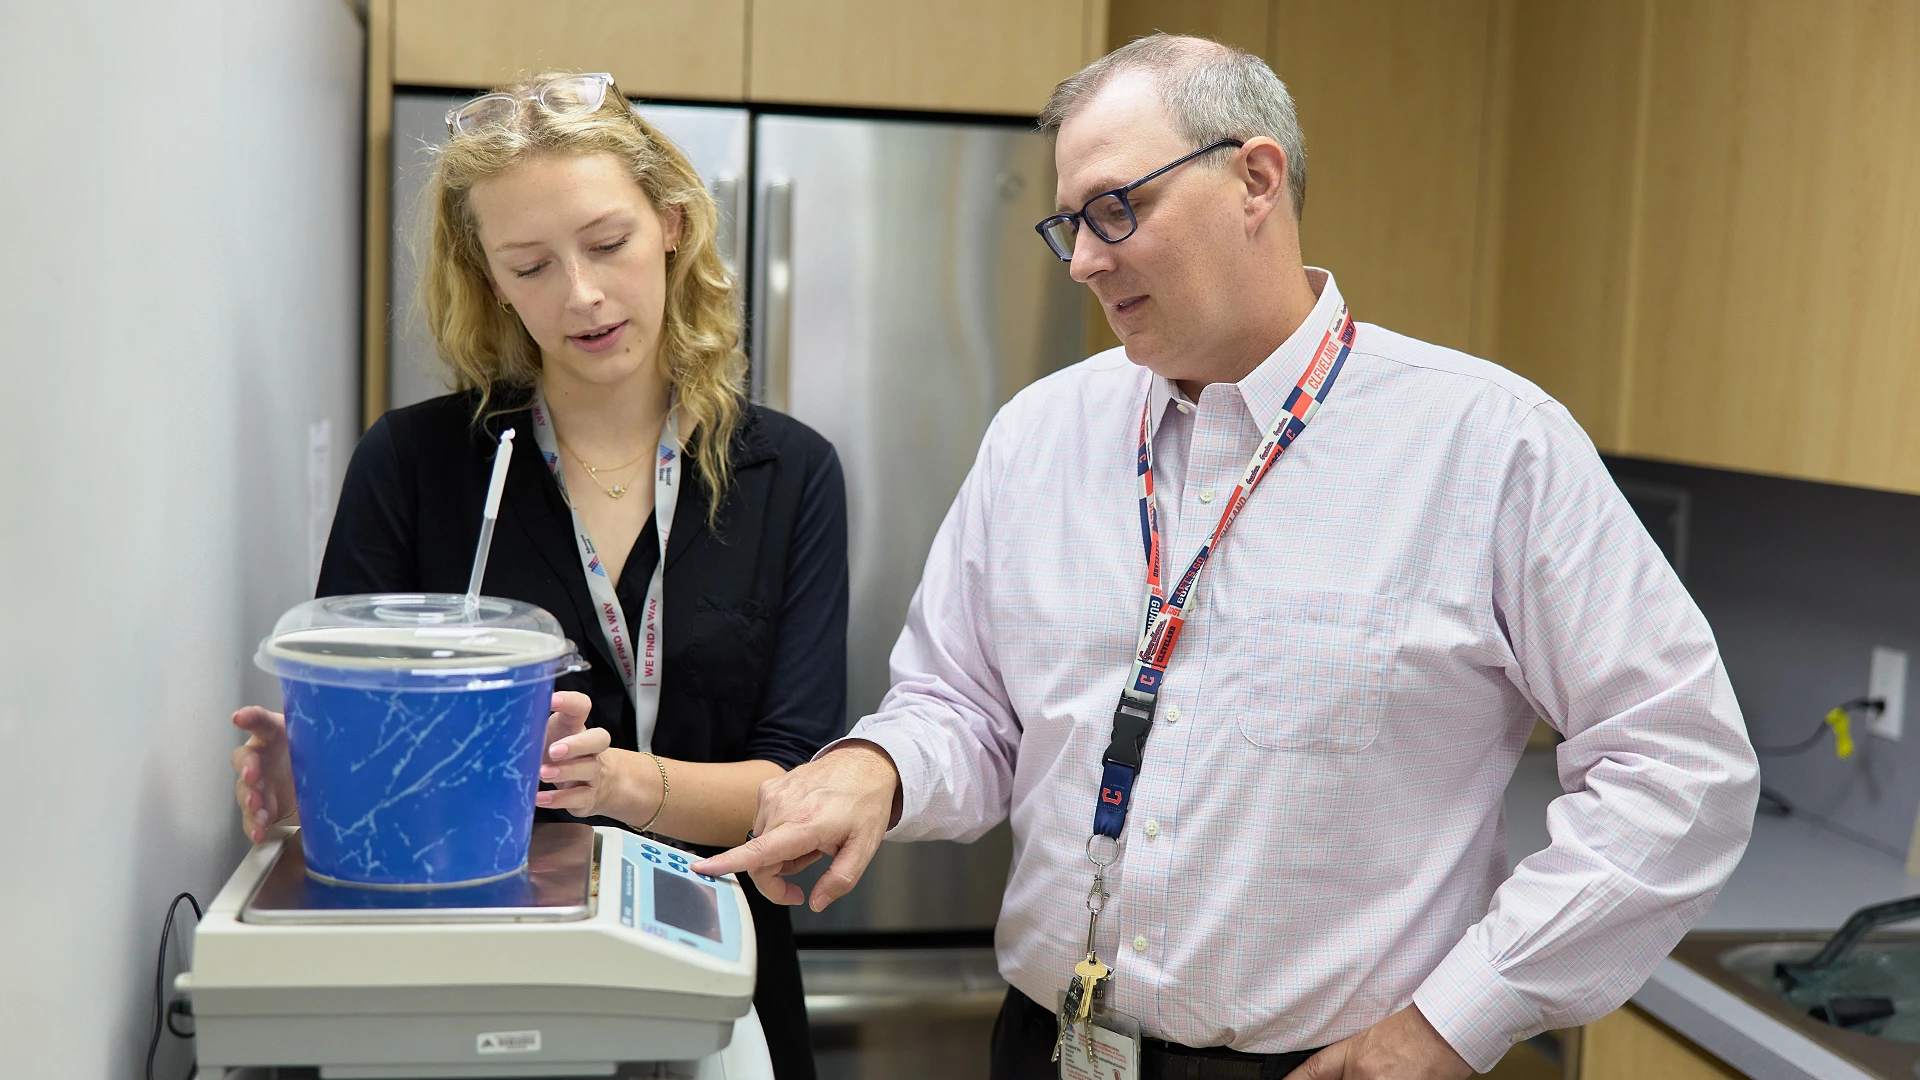 Food is medicine at the center, and a hallmark of treatment is the "mystery shake." Desiree Webb, lead research coordinator (left), and Dr. Hildebrandt (right), are preparing a container, which has a covered lid and an opaque covering to obscure the contents, to prevent patients from seeing what is contained within.